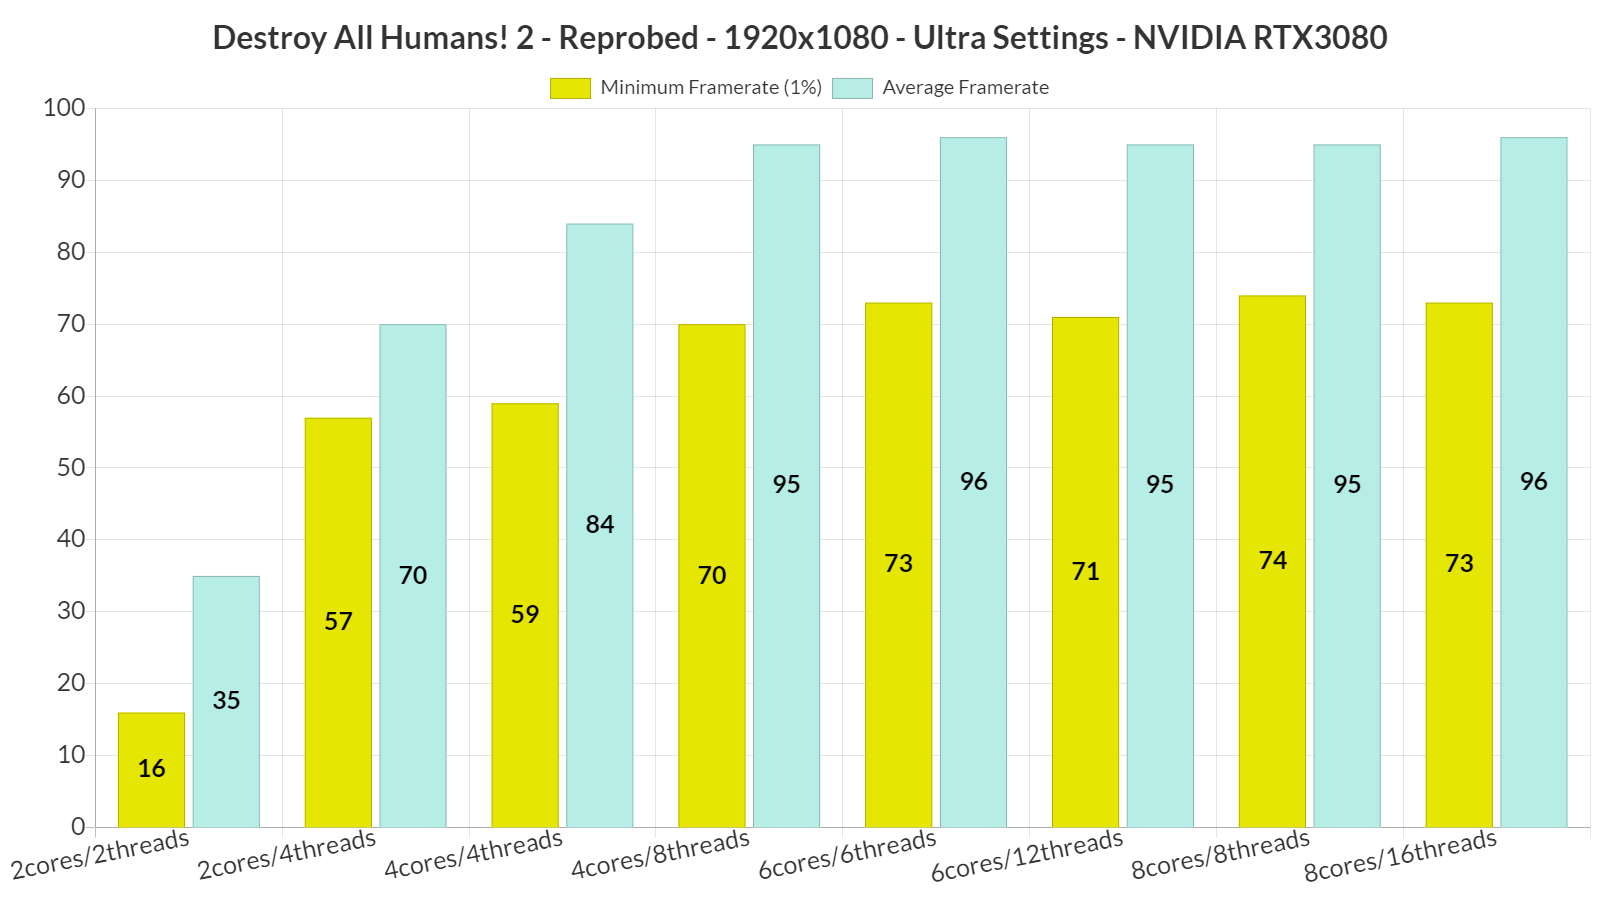 Destroy All Humans! 2 - Reprobed CPU benchmarks